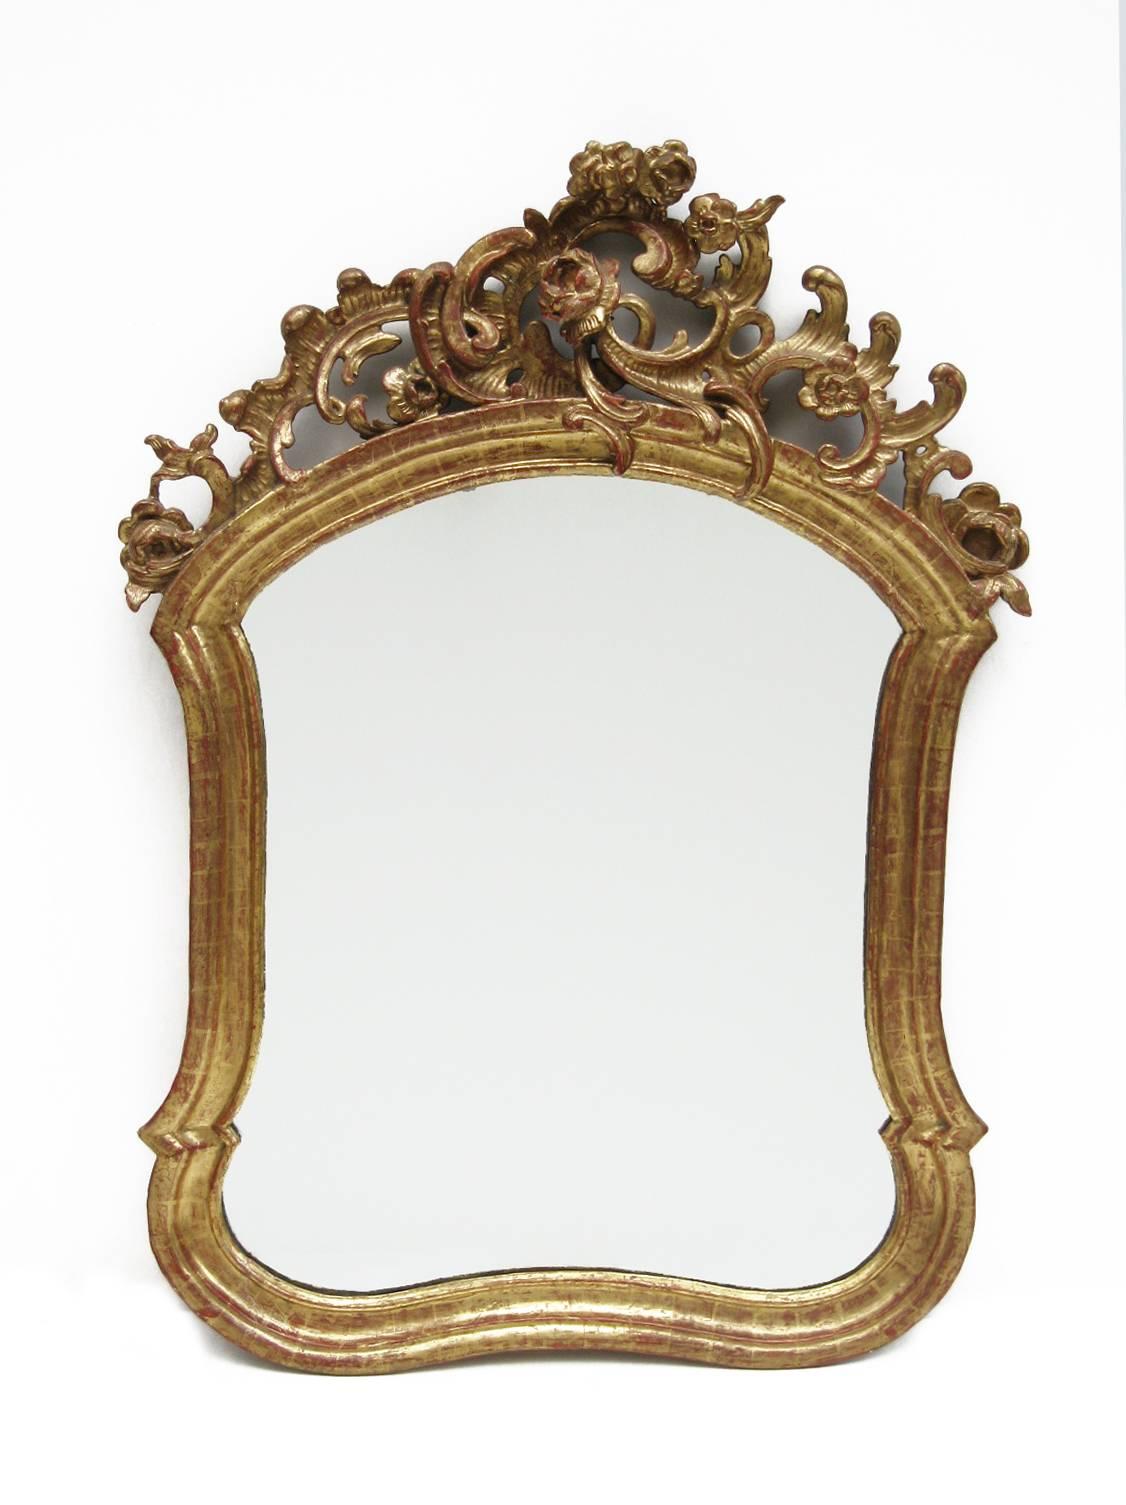 A fine pair of Baroque giltwood frames
with hand-carved scrolls and flowers on top.
  